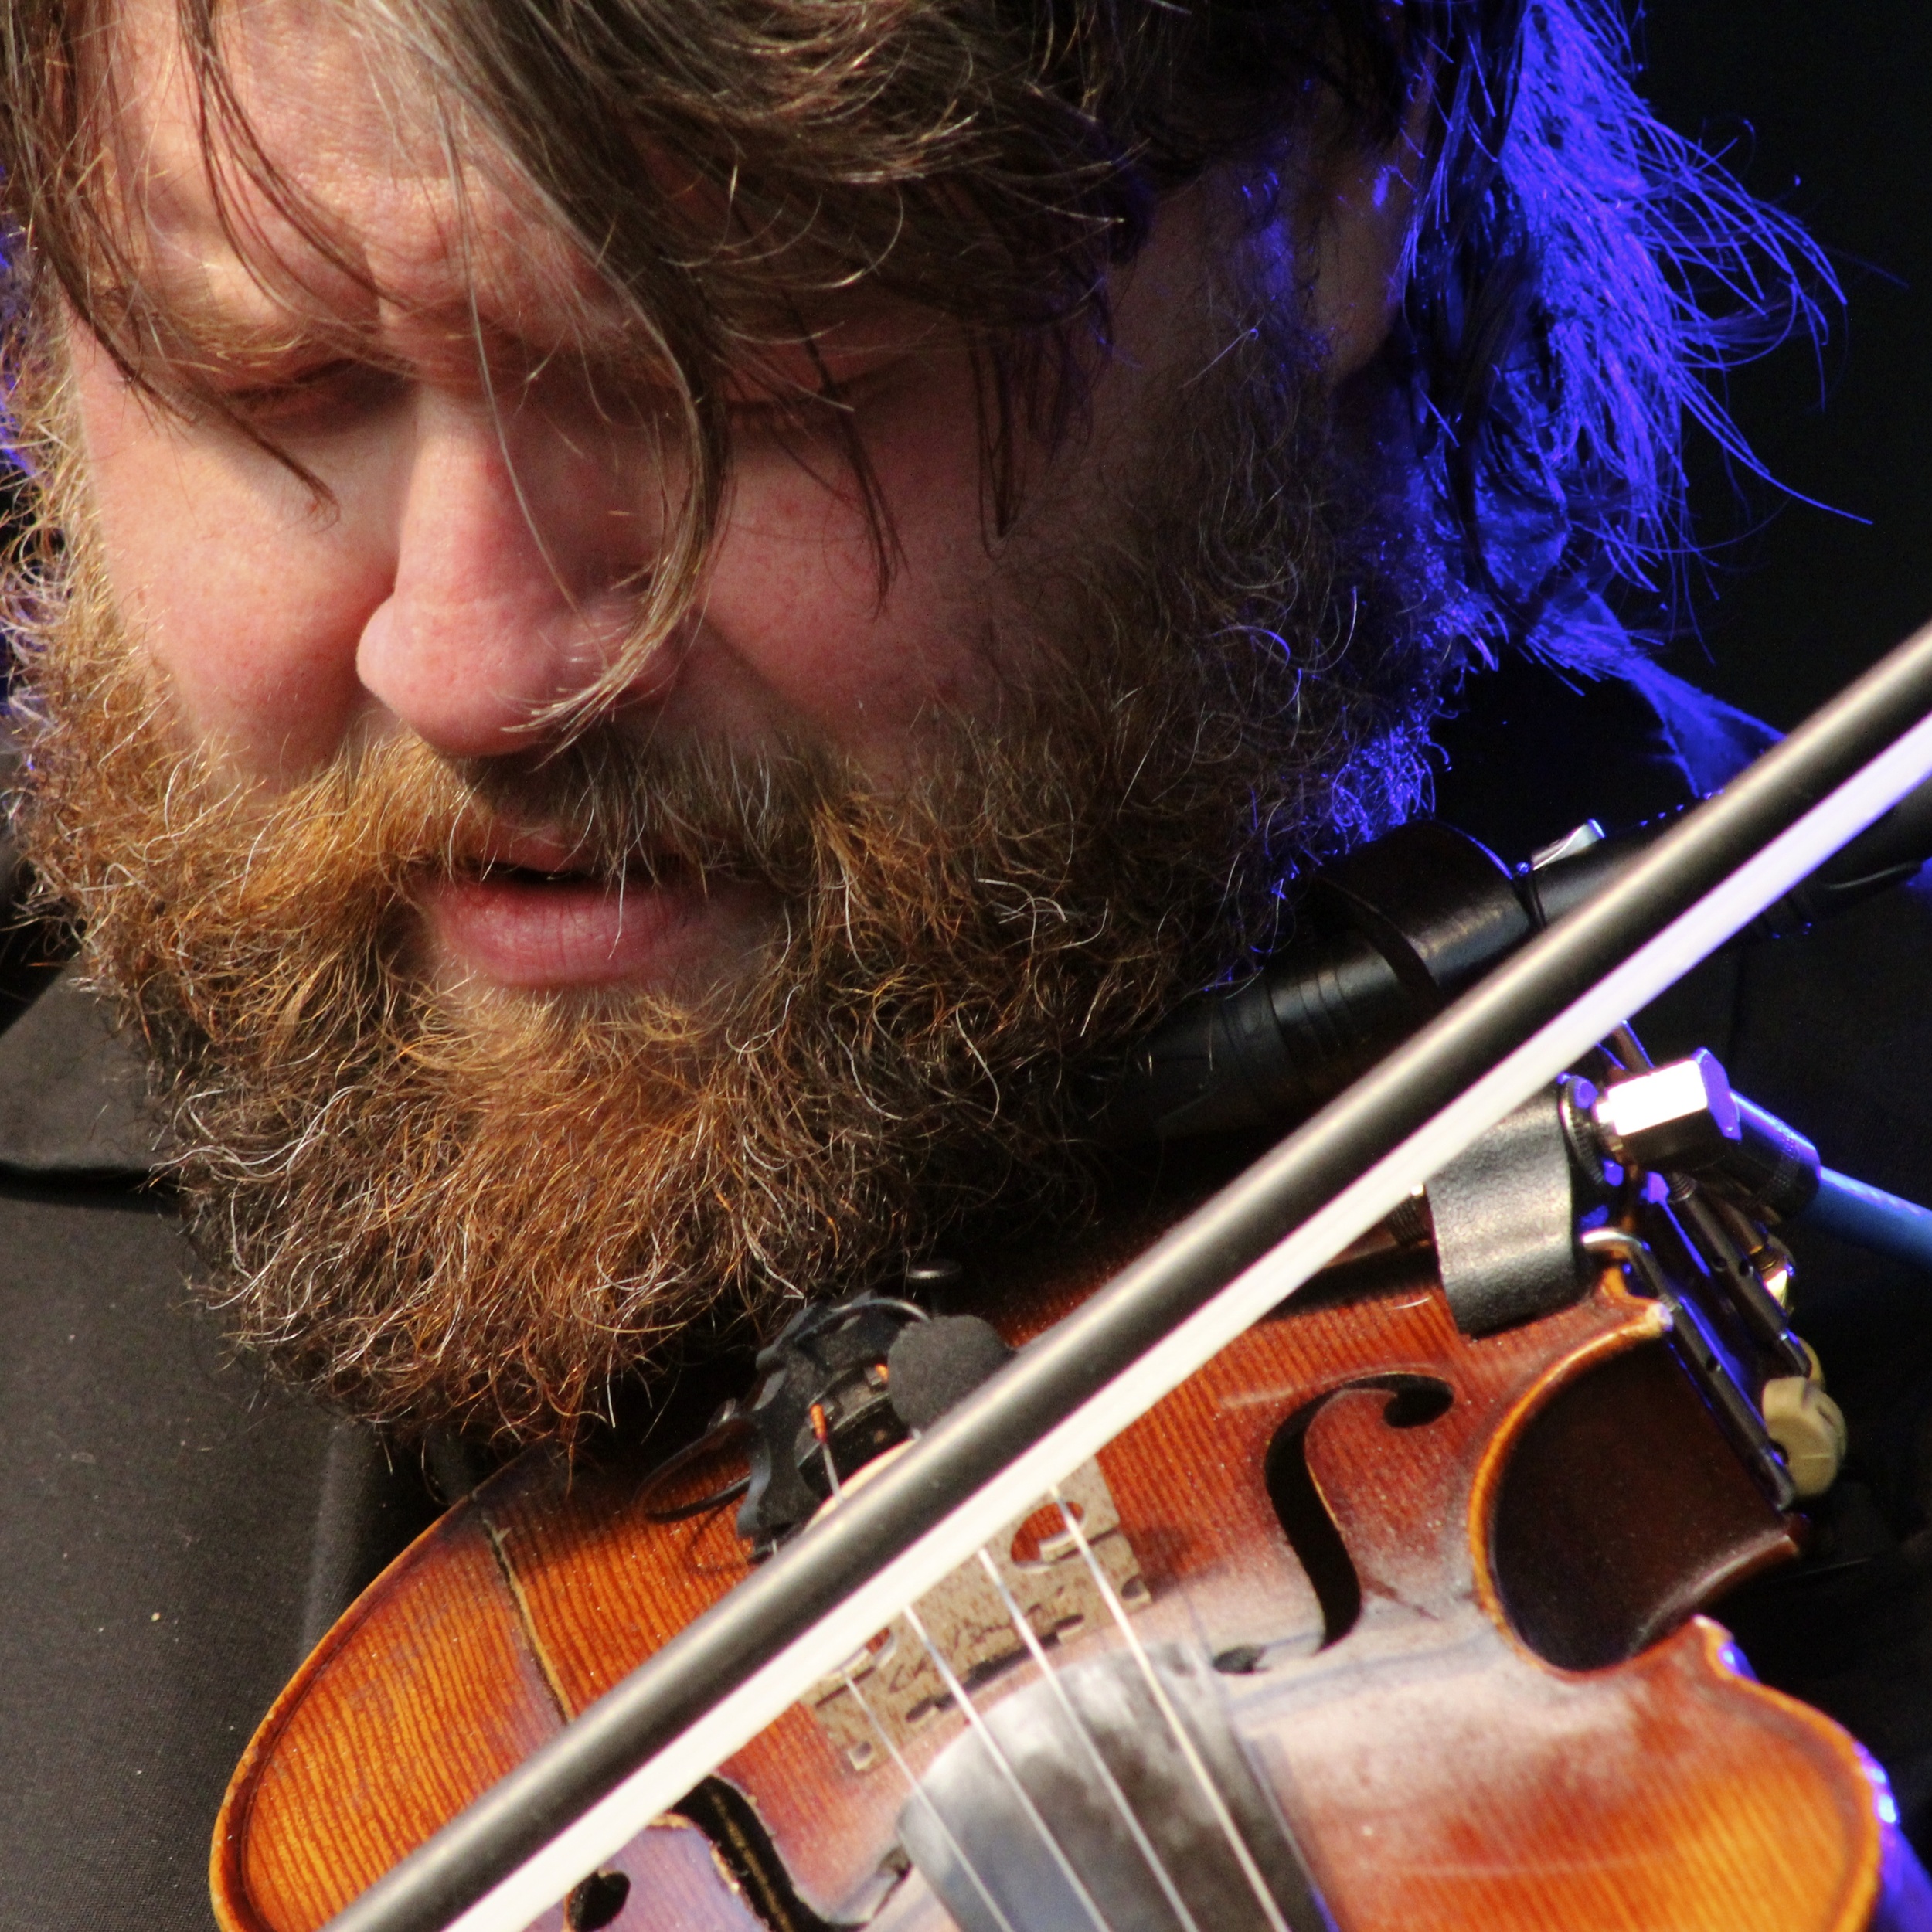 Ryan Young/Trampled By Turtles